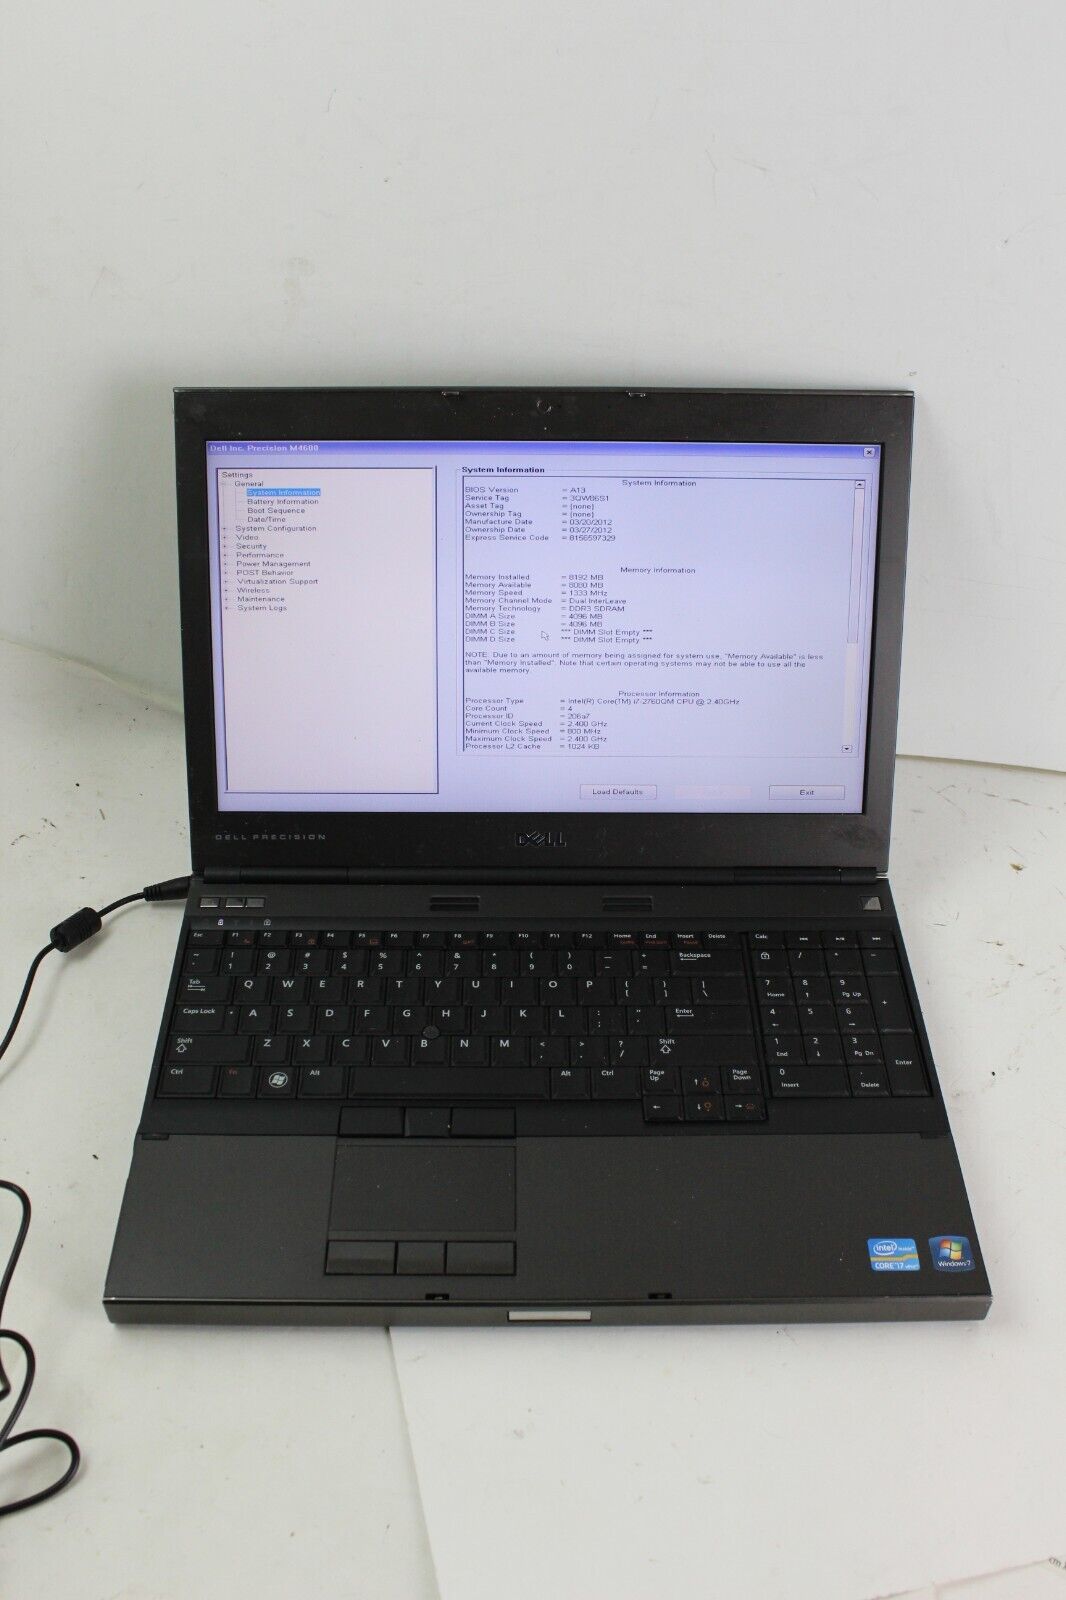 AS IS PARTS Dell Precision M4600 intel i7 8GB RAM NO HDD